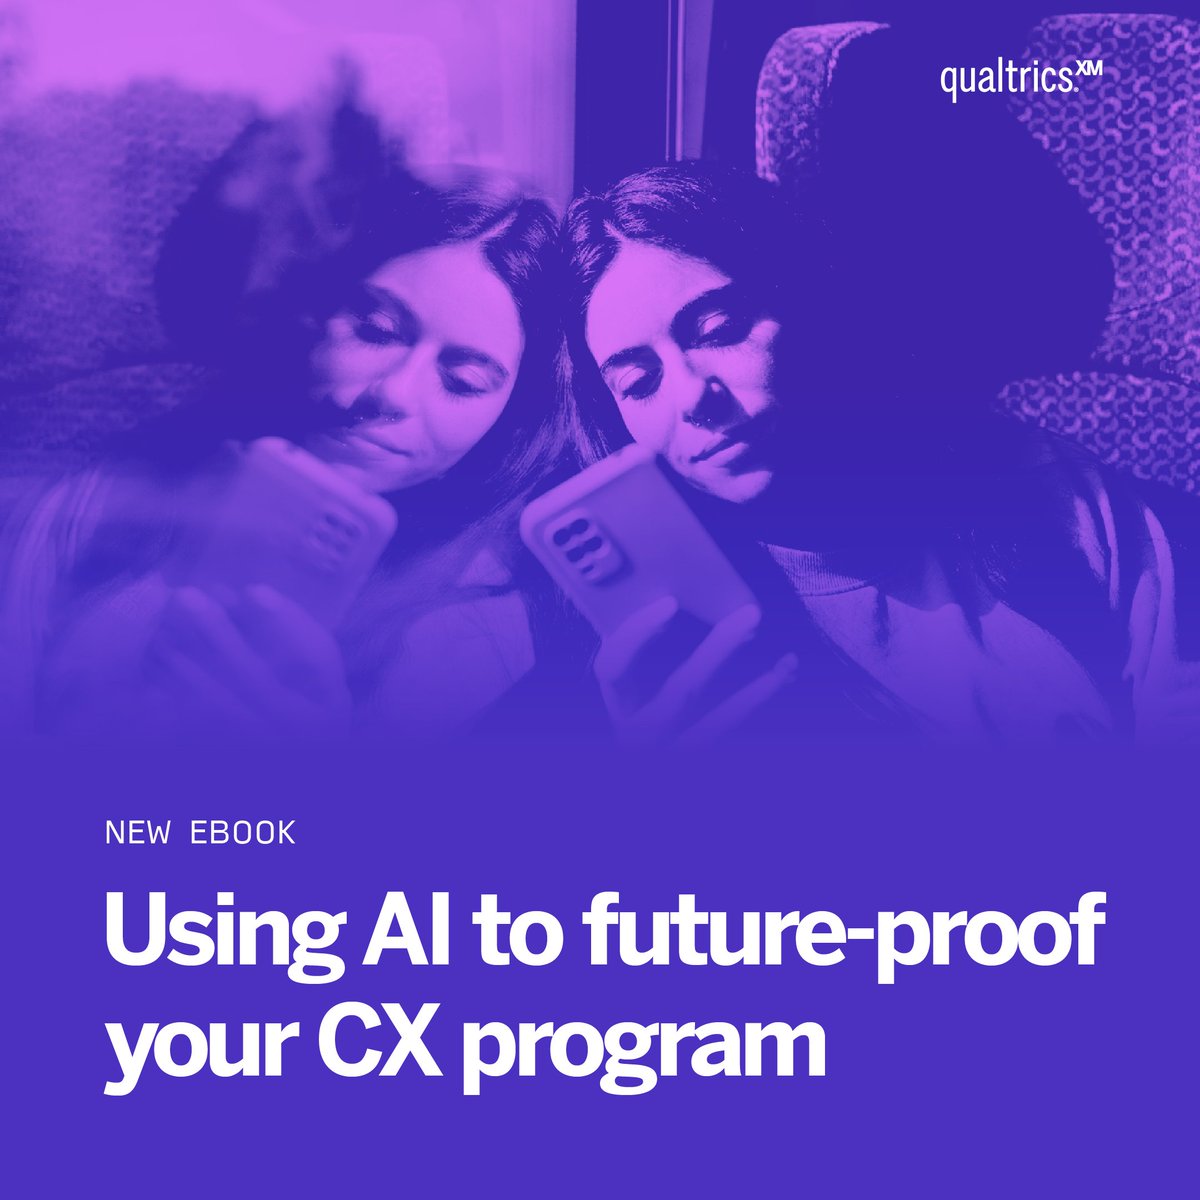 80% of data will be unstructured by 2025, according to IDC. Pulling in unsolicited feedback (calls, chats, social posts, reviews...) is the next frontier of CX. Check out our e-book to learn more. qualtrics.com/ebooks-guides/… bit.ly/46Q5K6j